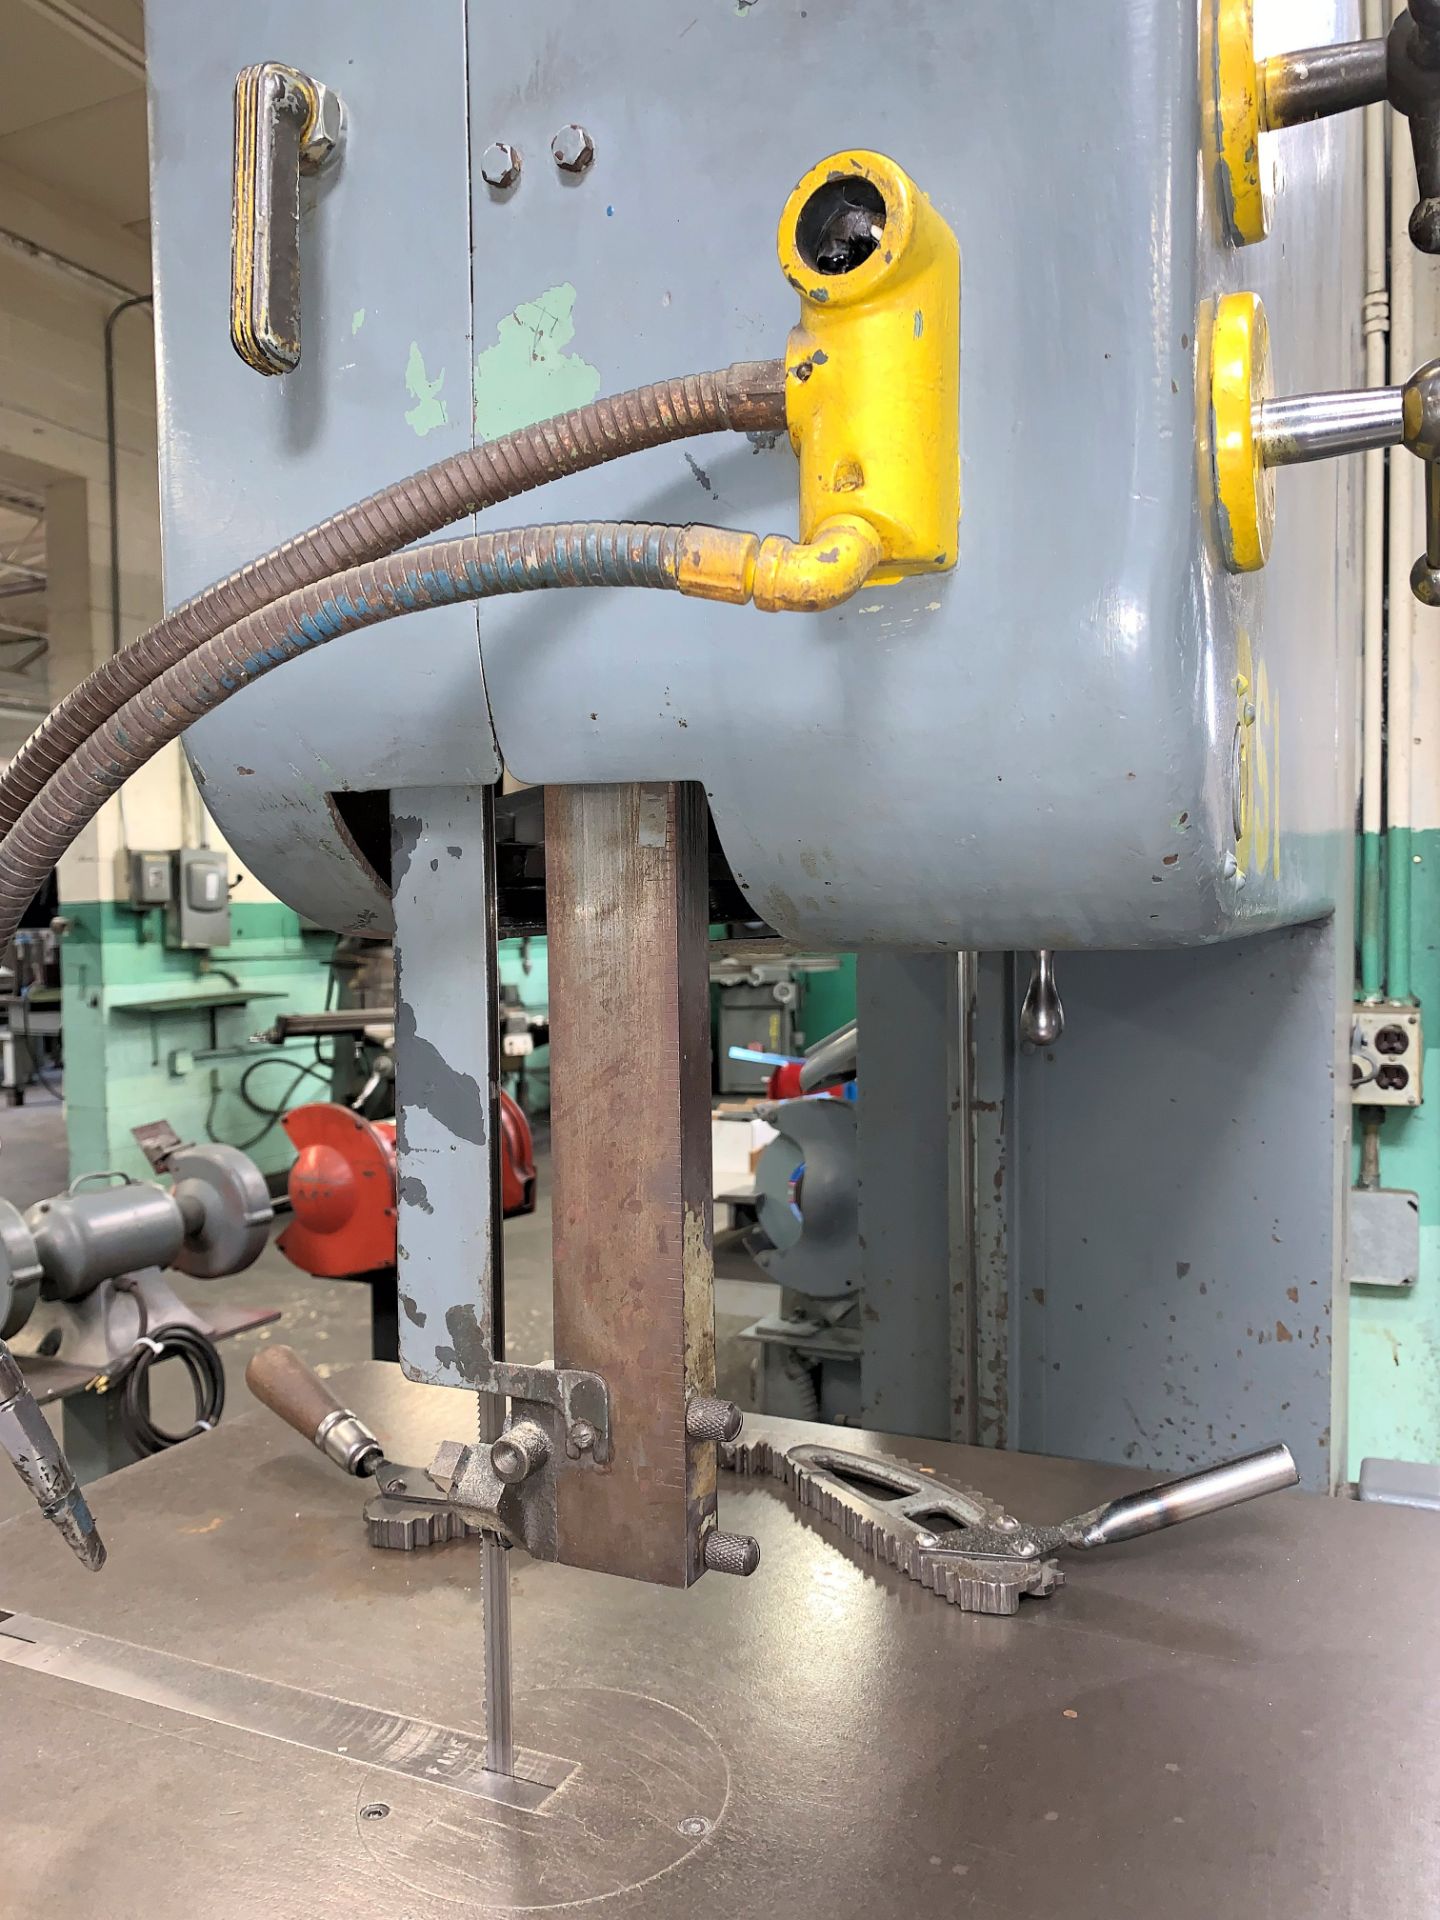 DoAll Model 26, 26" High Speed Vertical Band Saw - Image 3 of 5